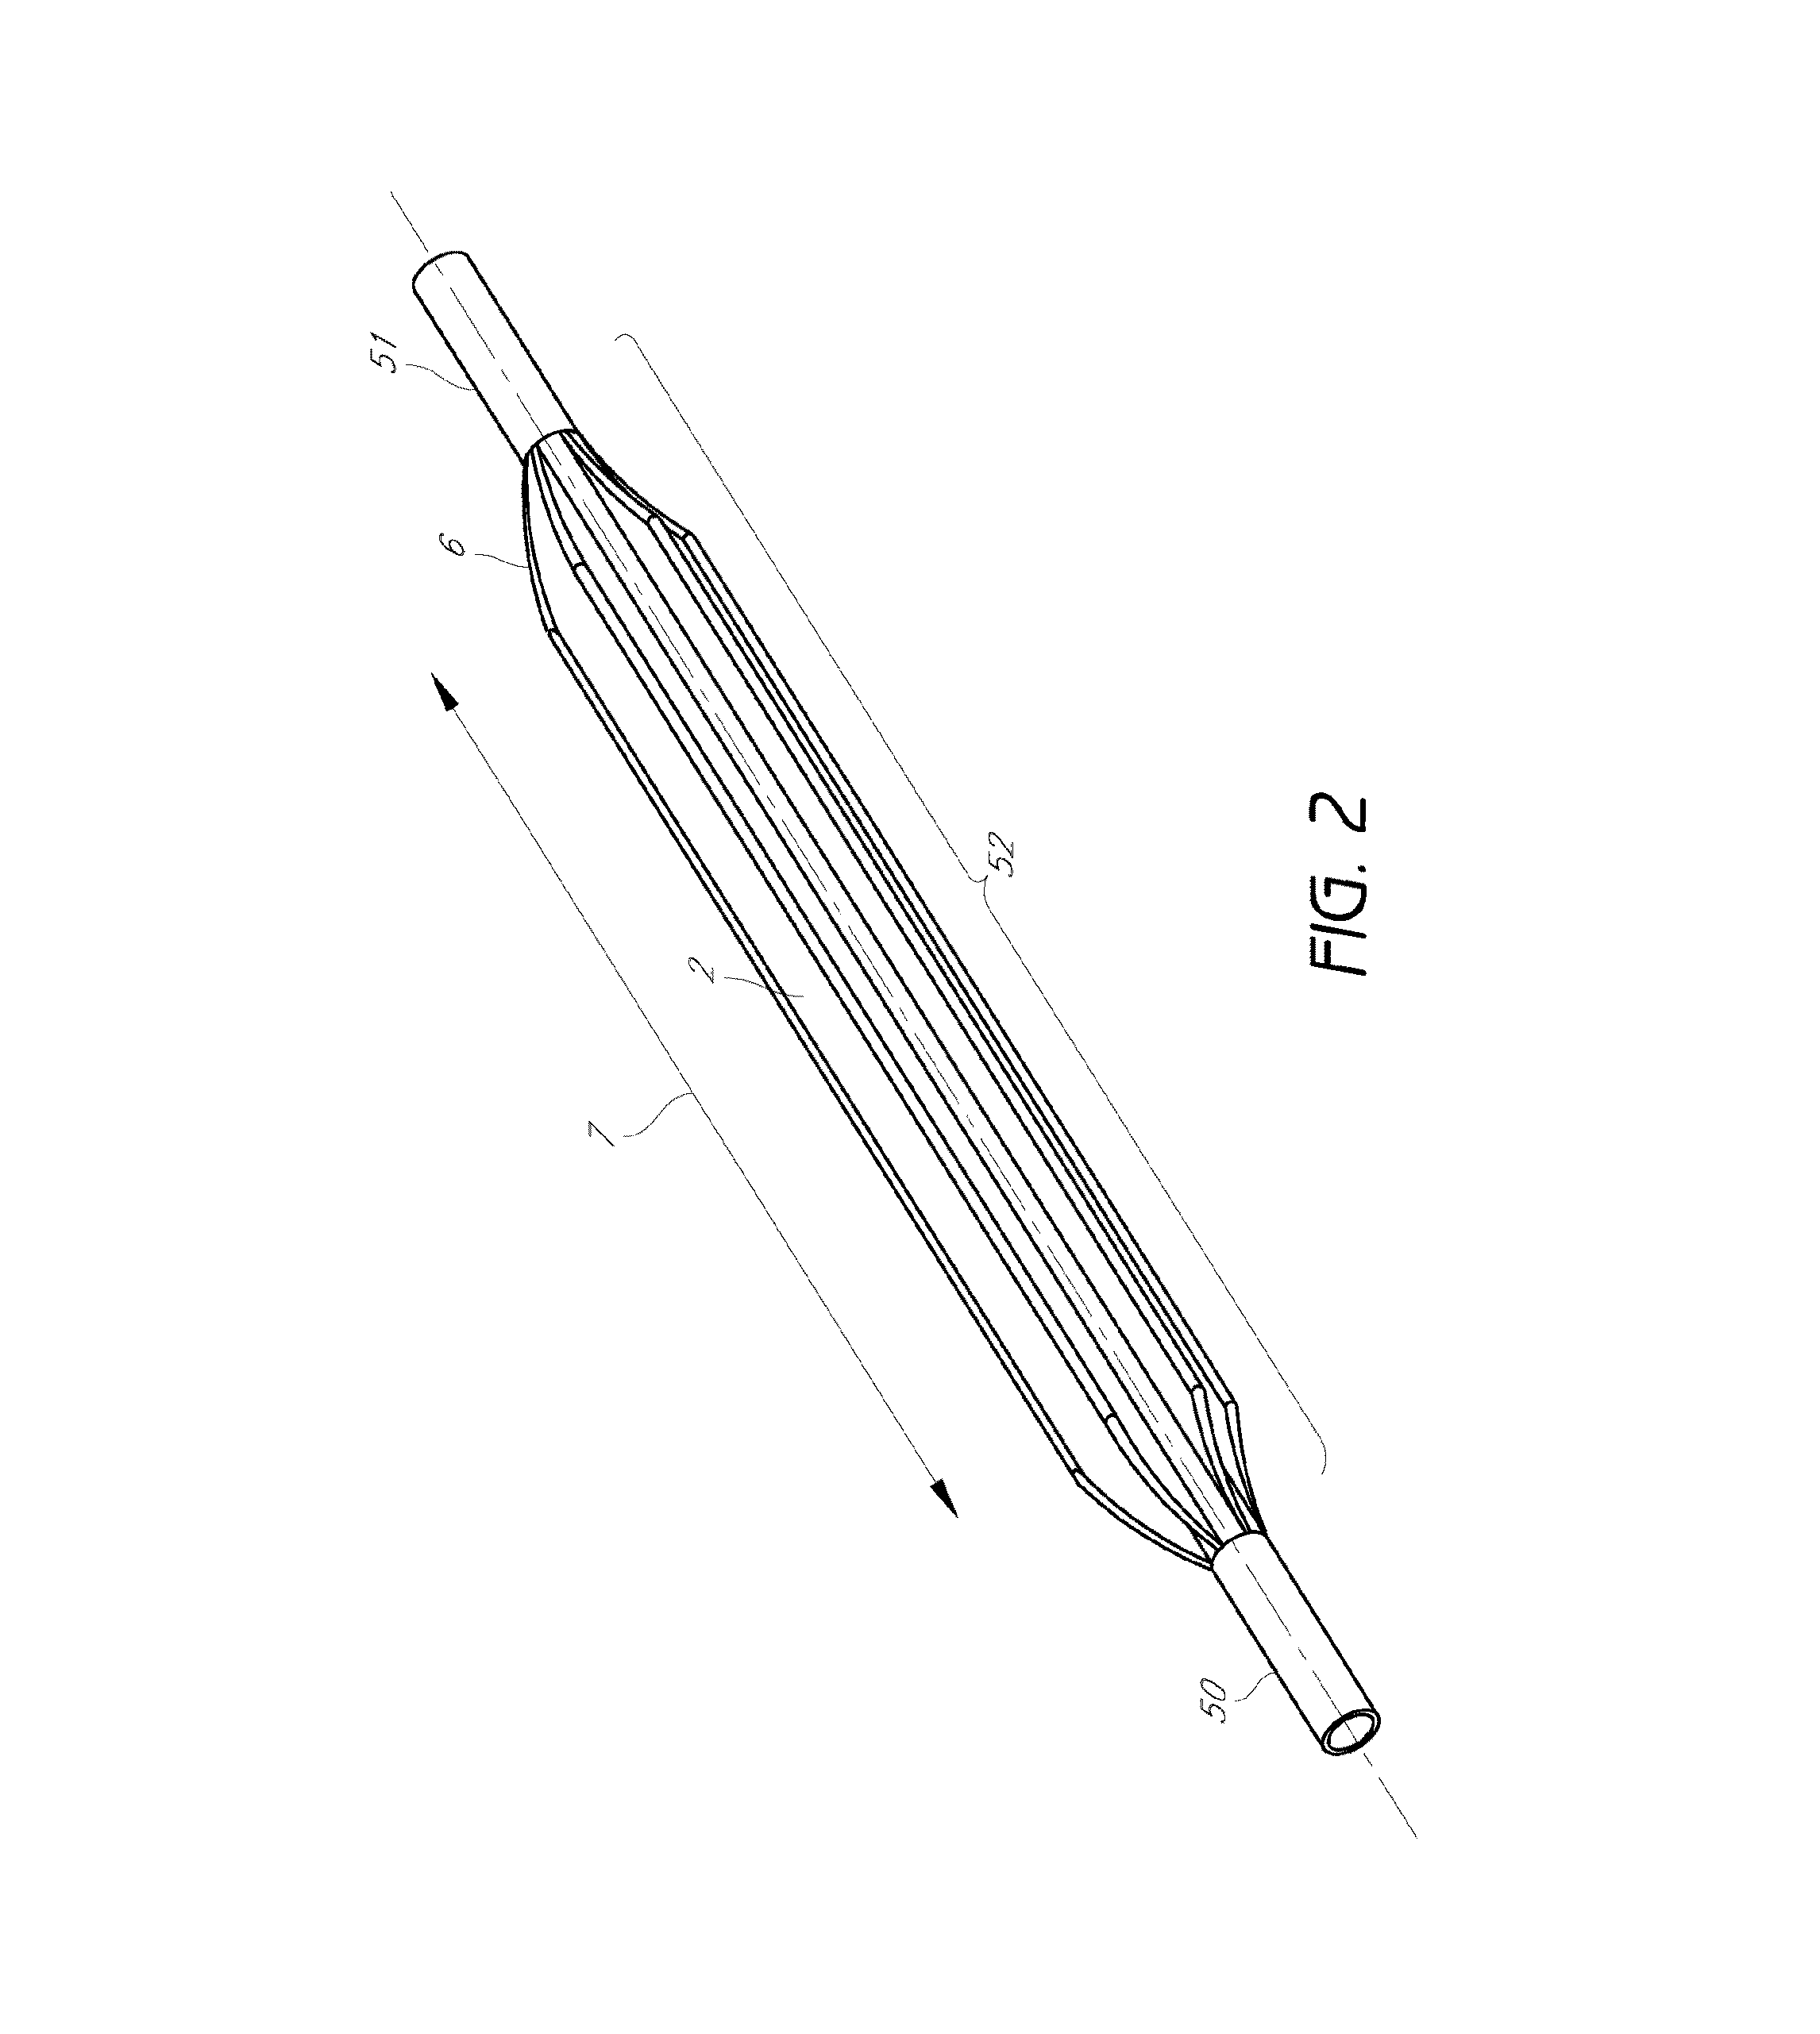 Nested balloons for medical applications and methods for manufacturing the same